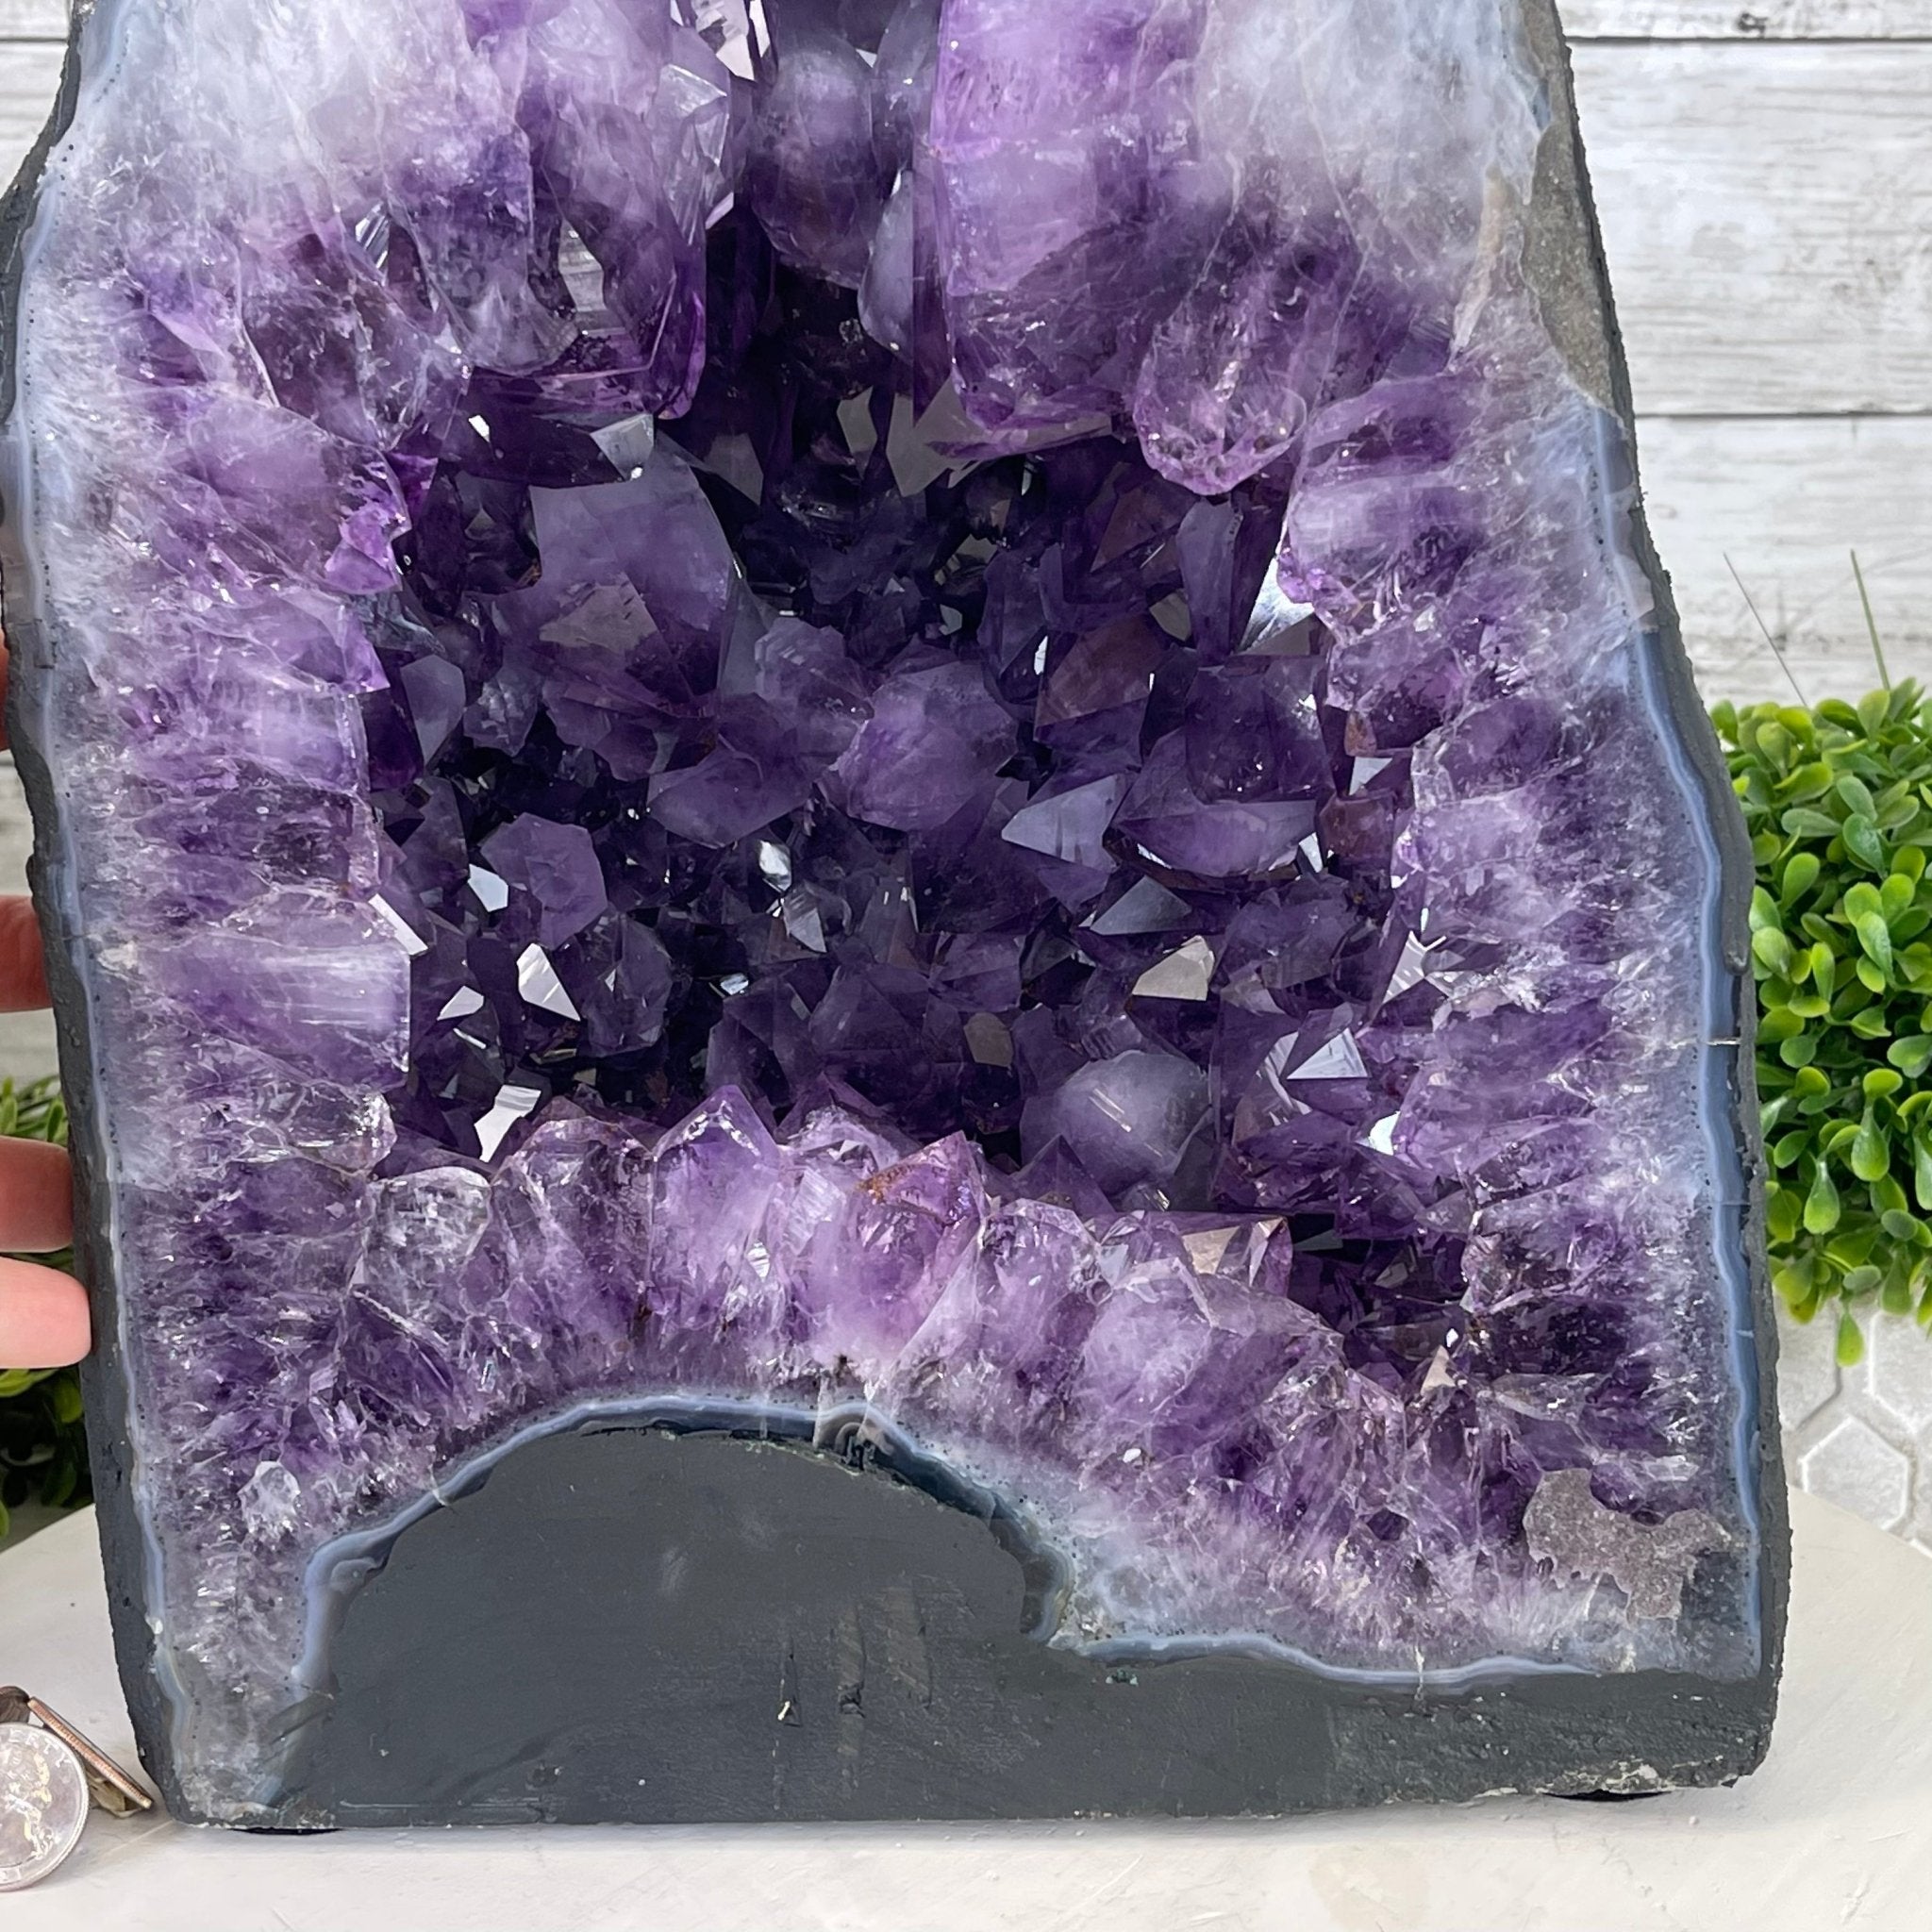 Extra Quality Brazilian Amethyst Cathedral, 45.7 lbs & 16.5" Tall #5601-0703 by Brazil Gems - Brazil GemsBrazil GemsExtra Quality Brazilian Amethyst Cathedral, 45.7 lbs & 16.5" Tall #5601-0703 by Brazil GemsCathedrals5601-0703